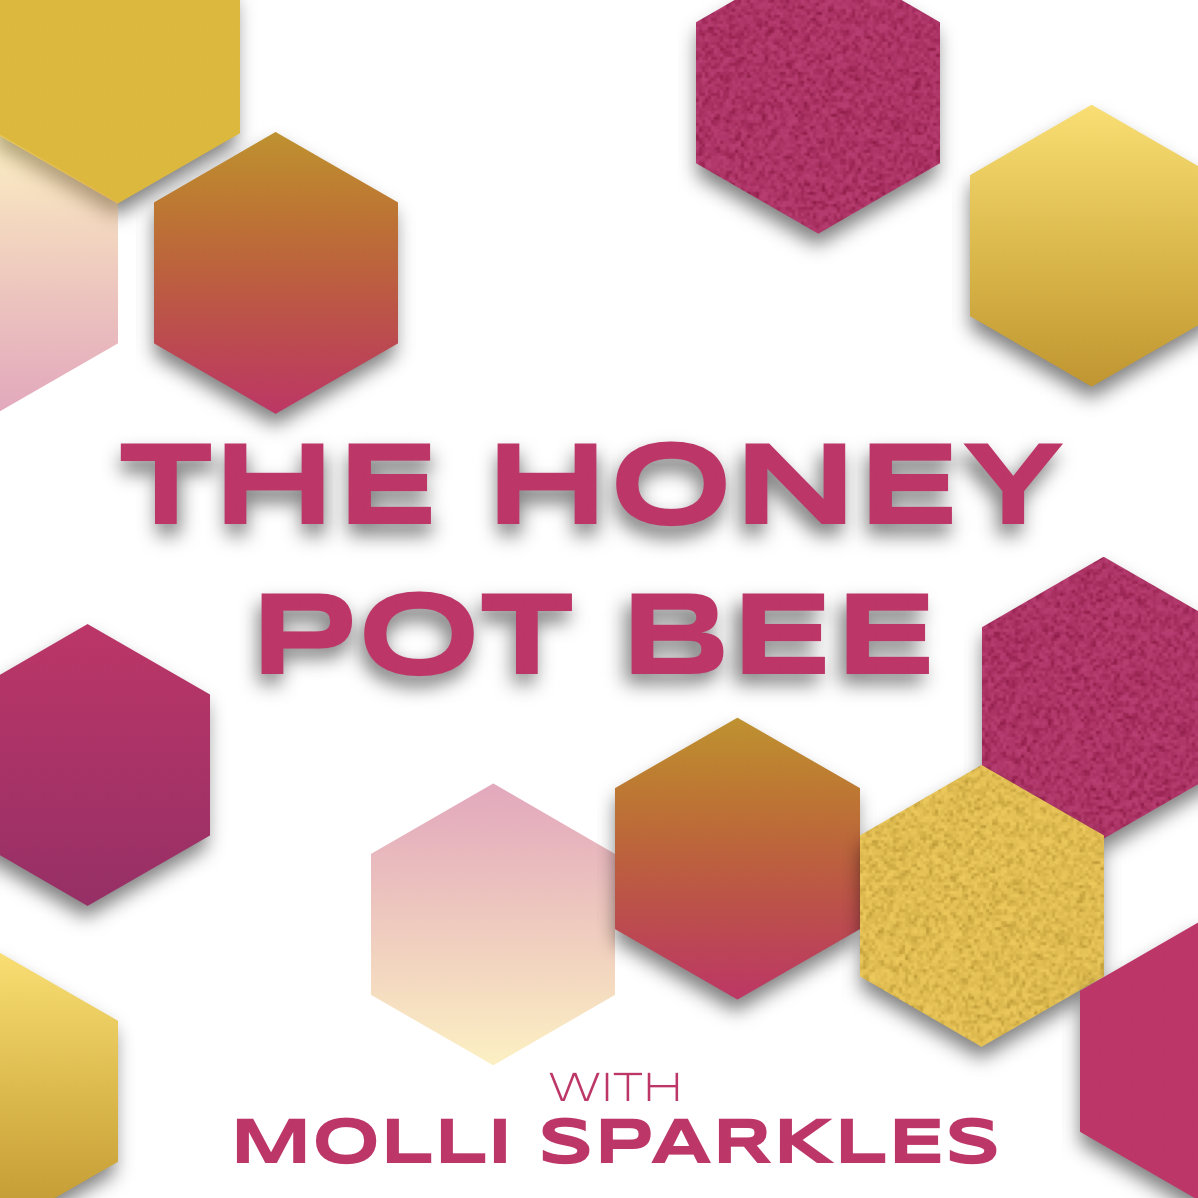 “the-honey-pot-bee-with-molli-sparkles“